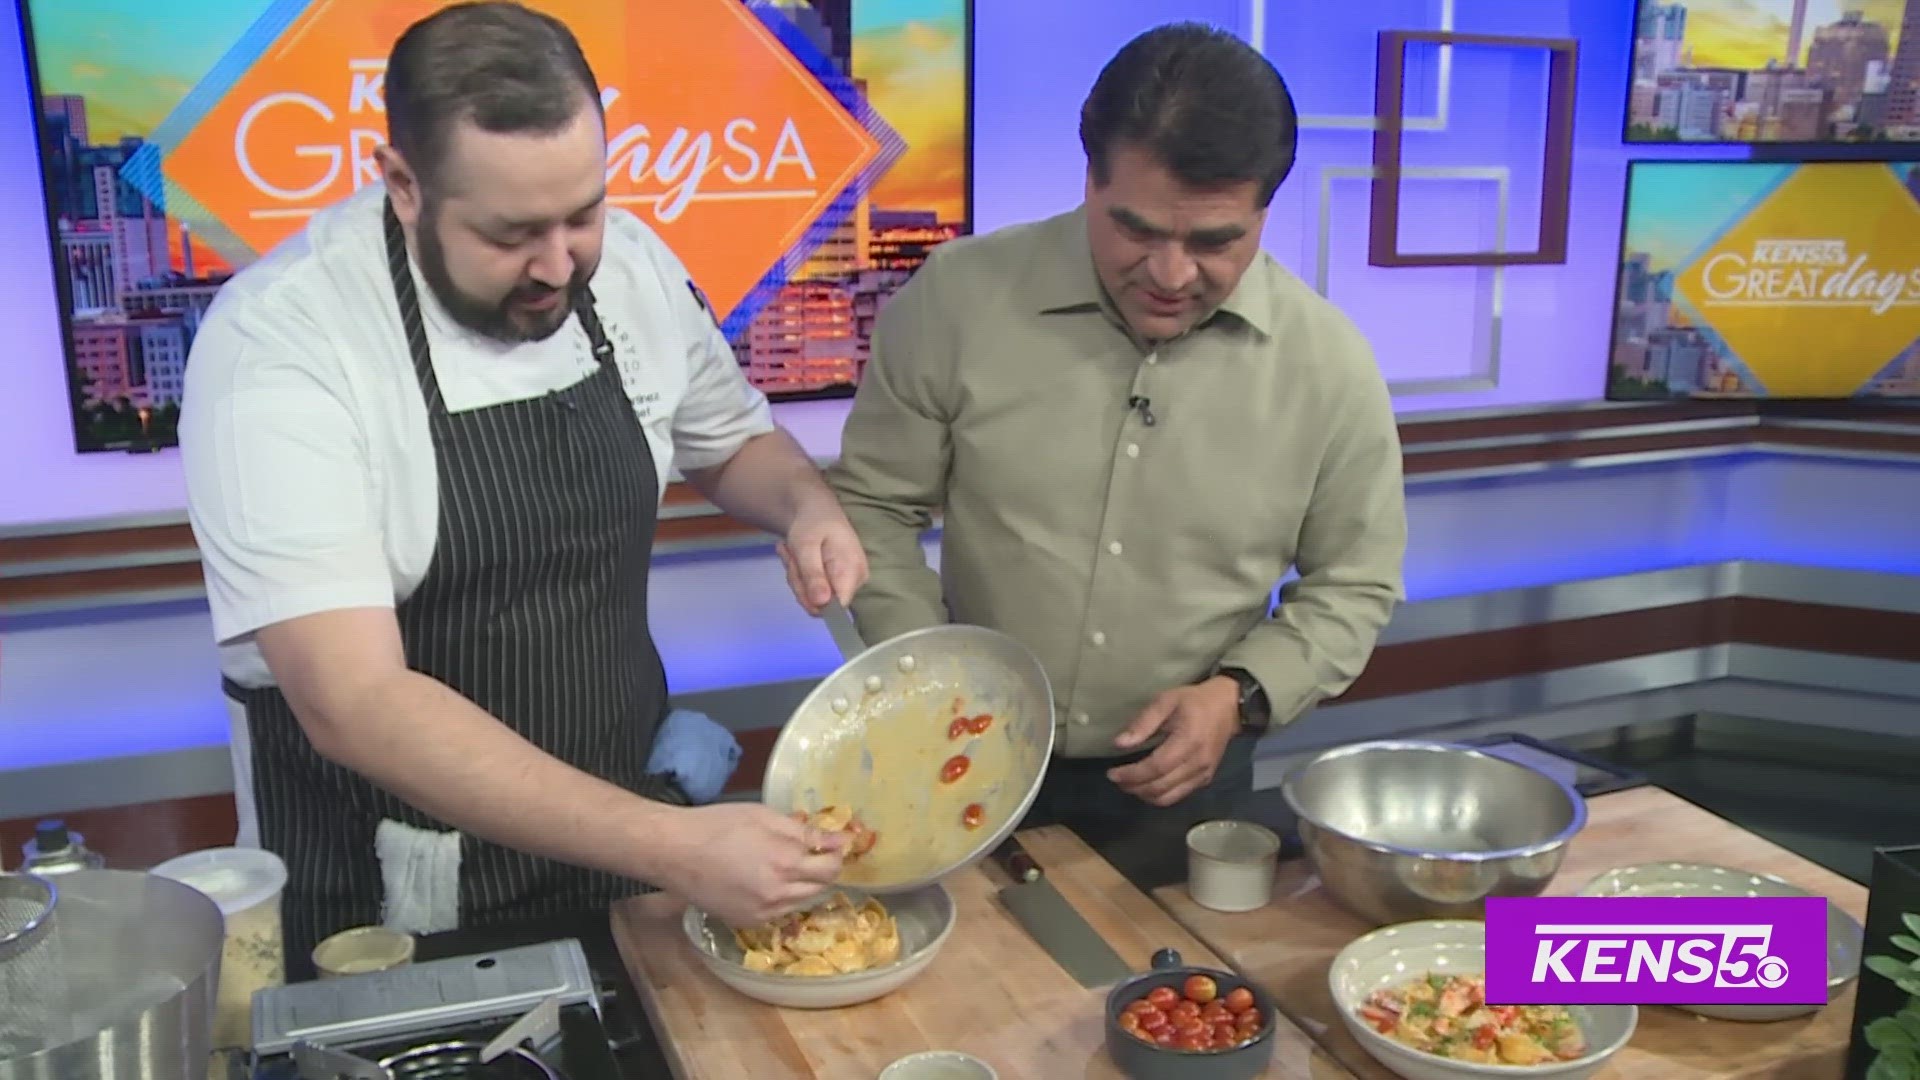 Senior Sous Chef Joseph Martinez from Tributary San Antonio stops by to teach Paul how to create a delicious romantic seafood dish.